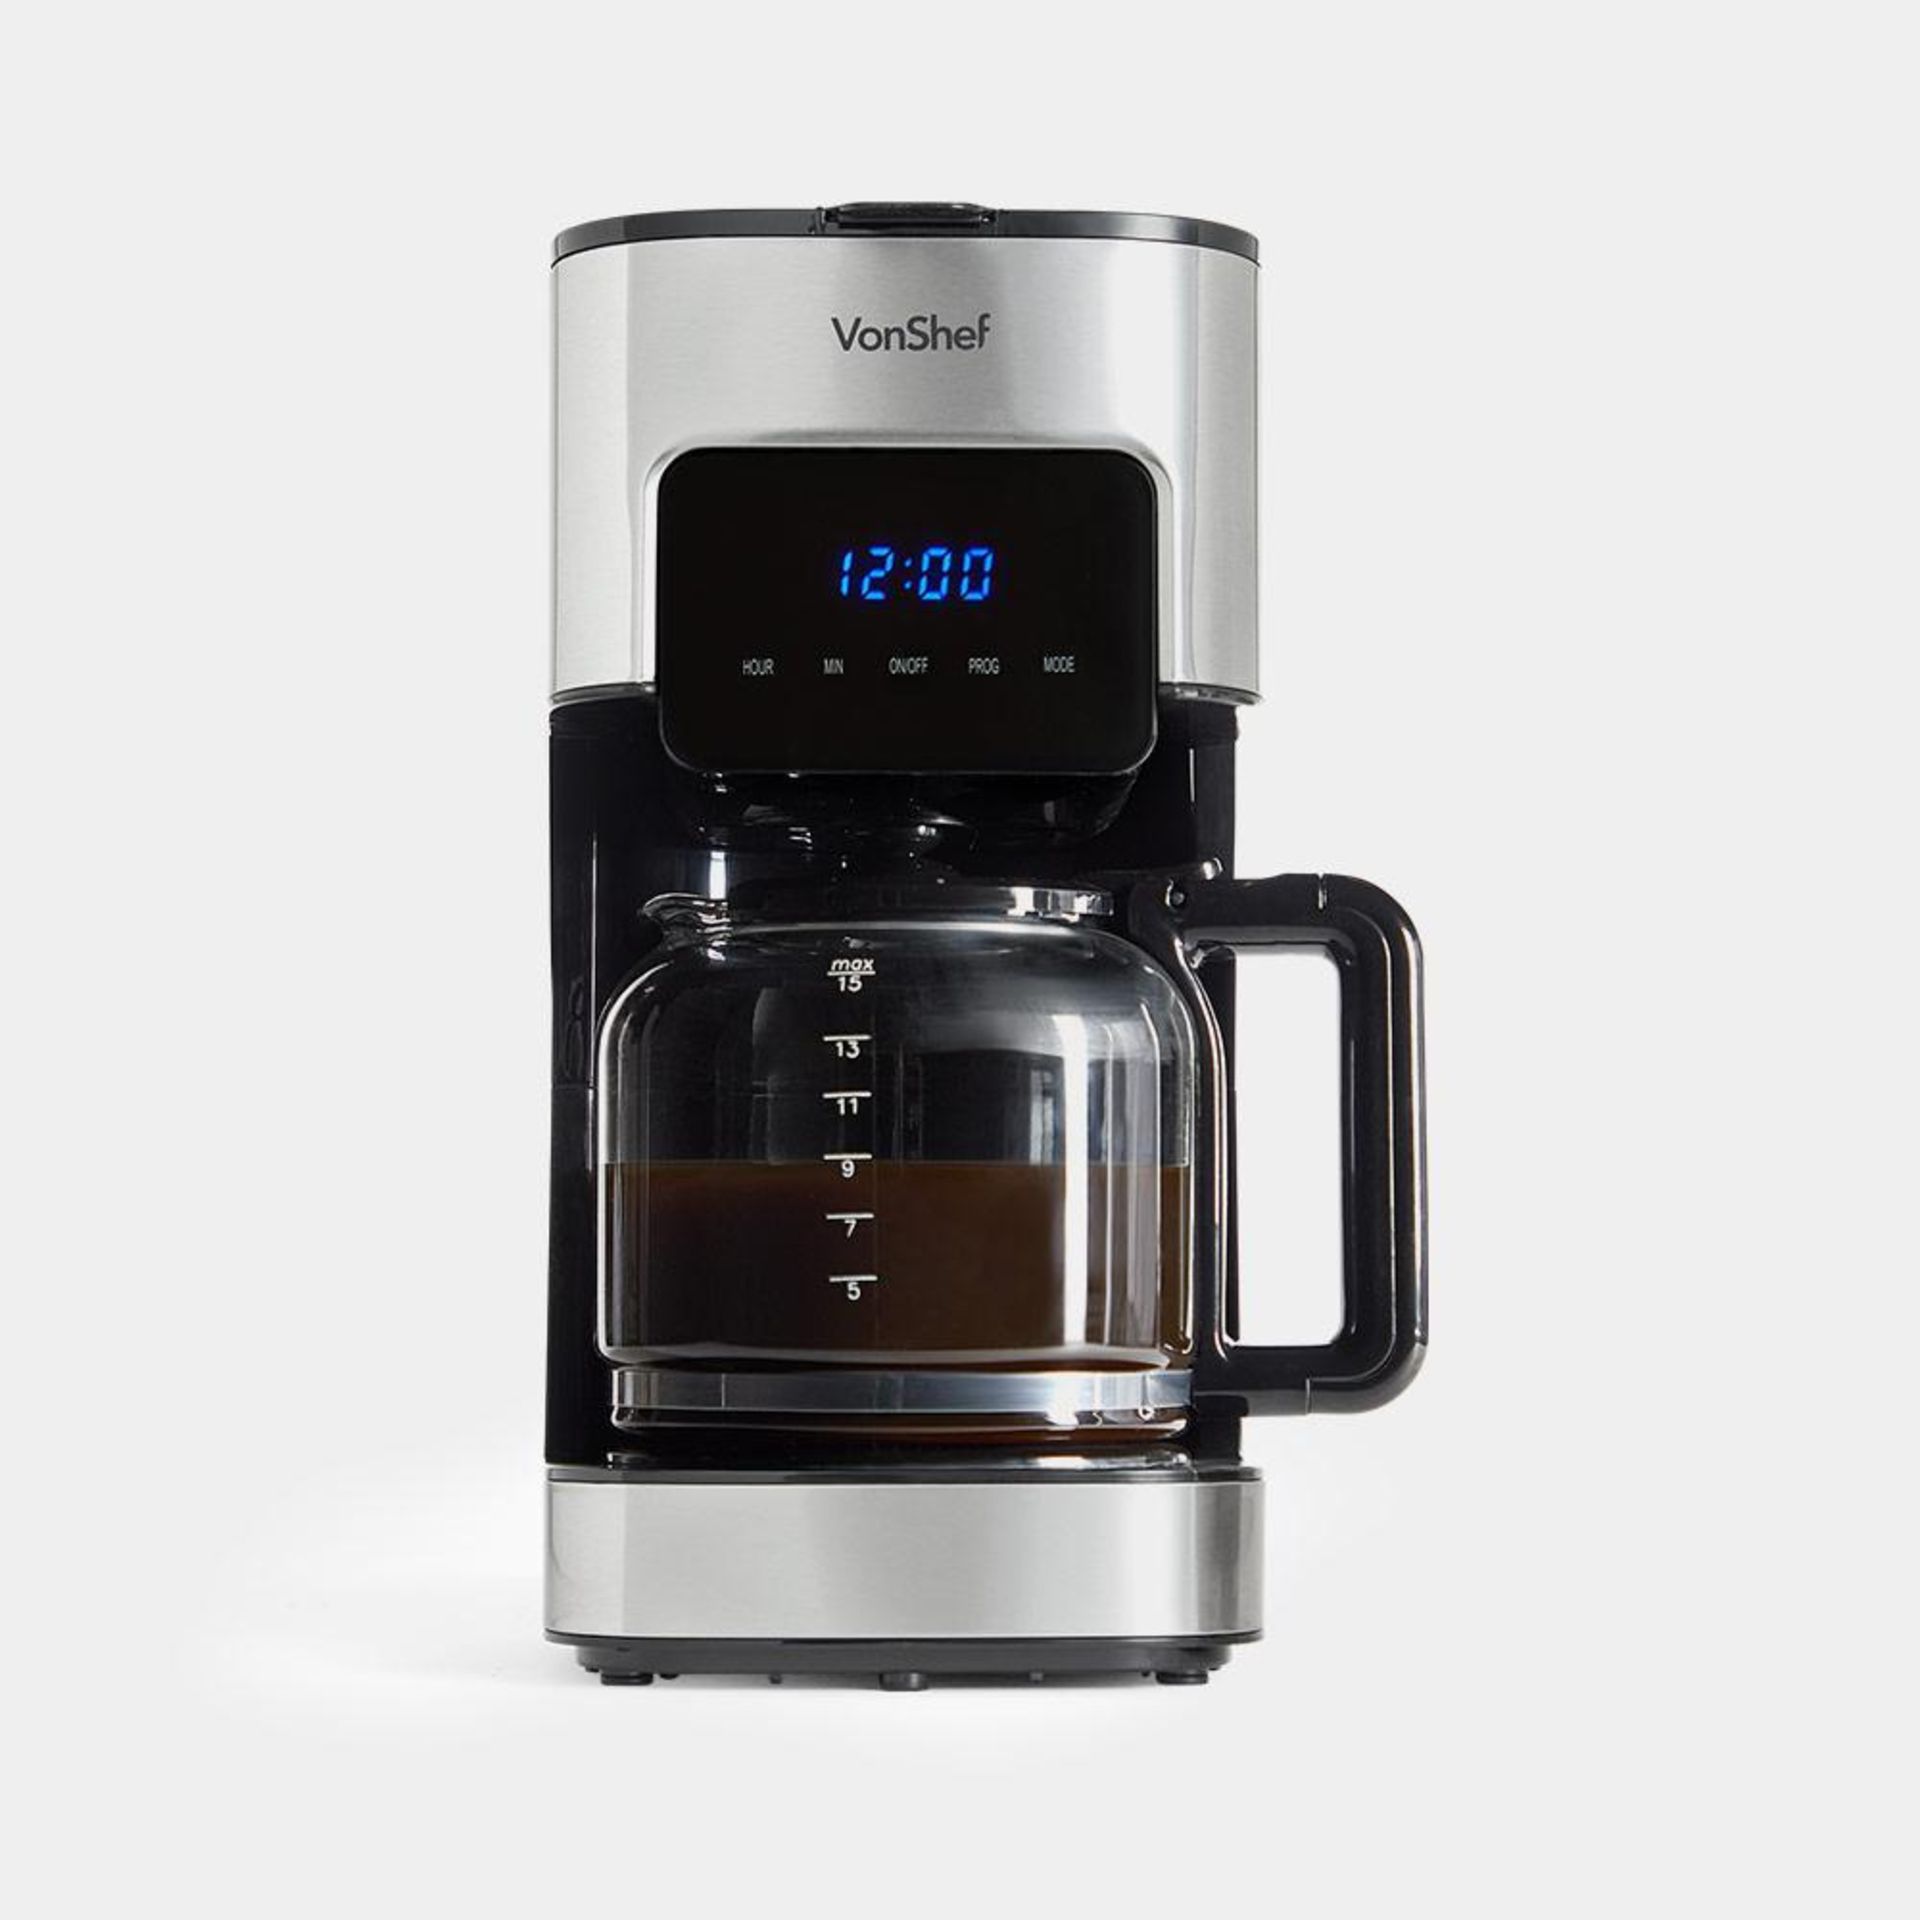 1.5L Filter Coffee Machine - ER51. Make yourself a tasty coffee to start the day off right with this